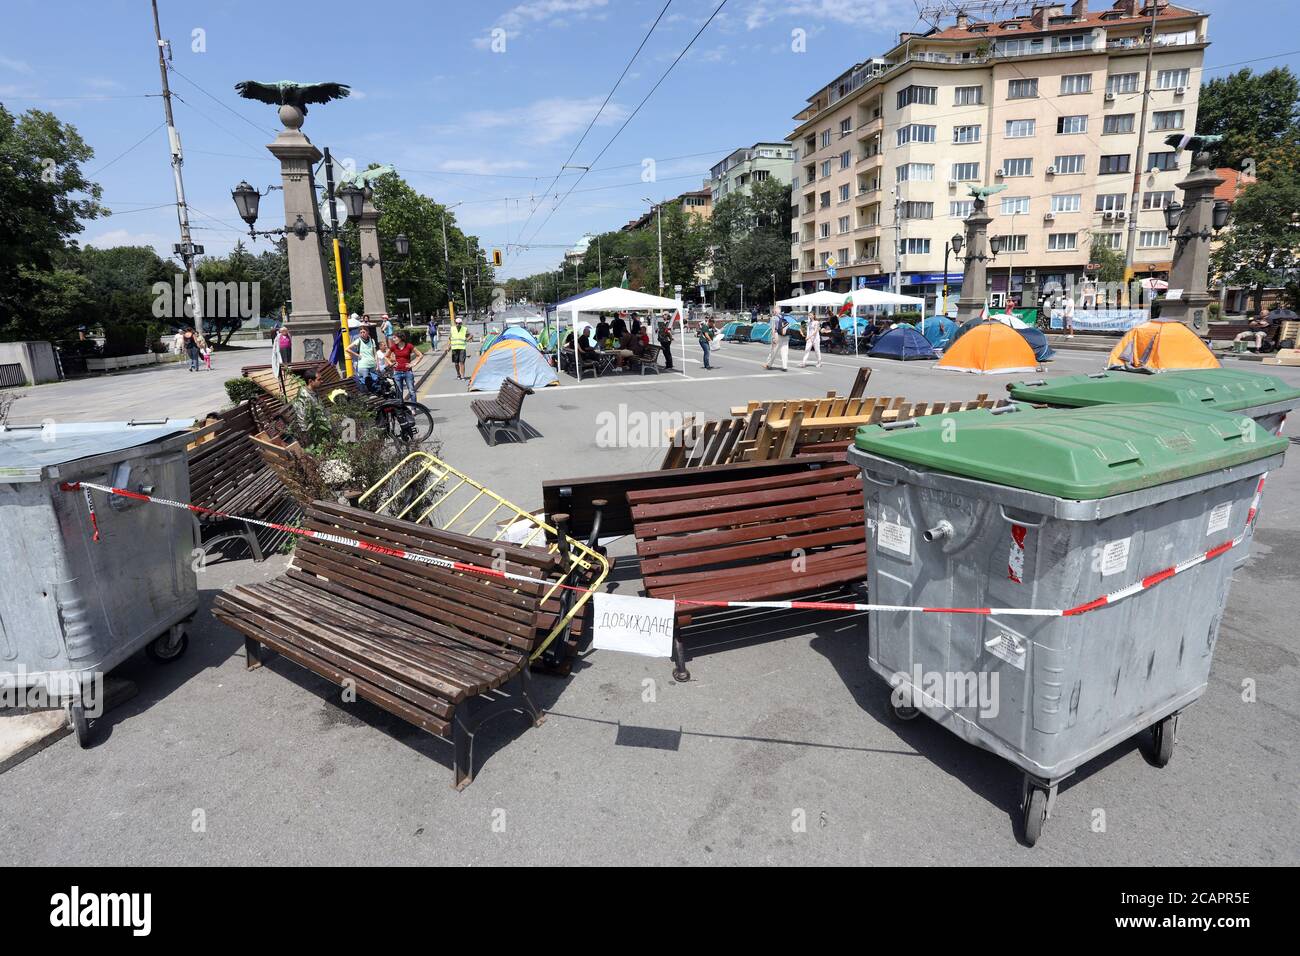 The 31st day of the protest against the government and the chief prosecutor set up barricades on Orlov most (Eagle Bridge) in Sofia, Bulgaria on 08/08 Stock Photo